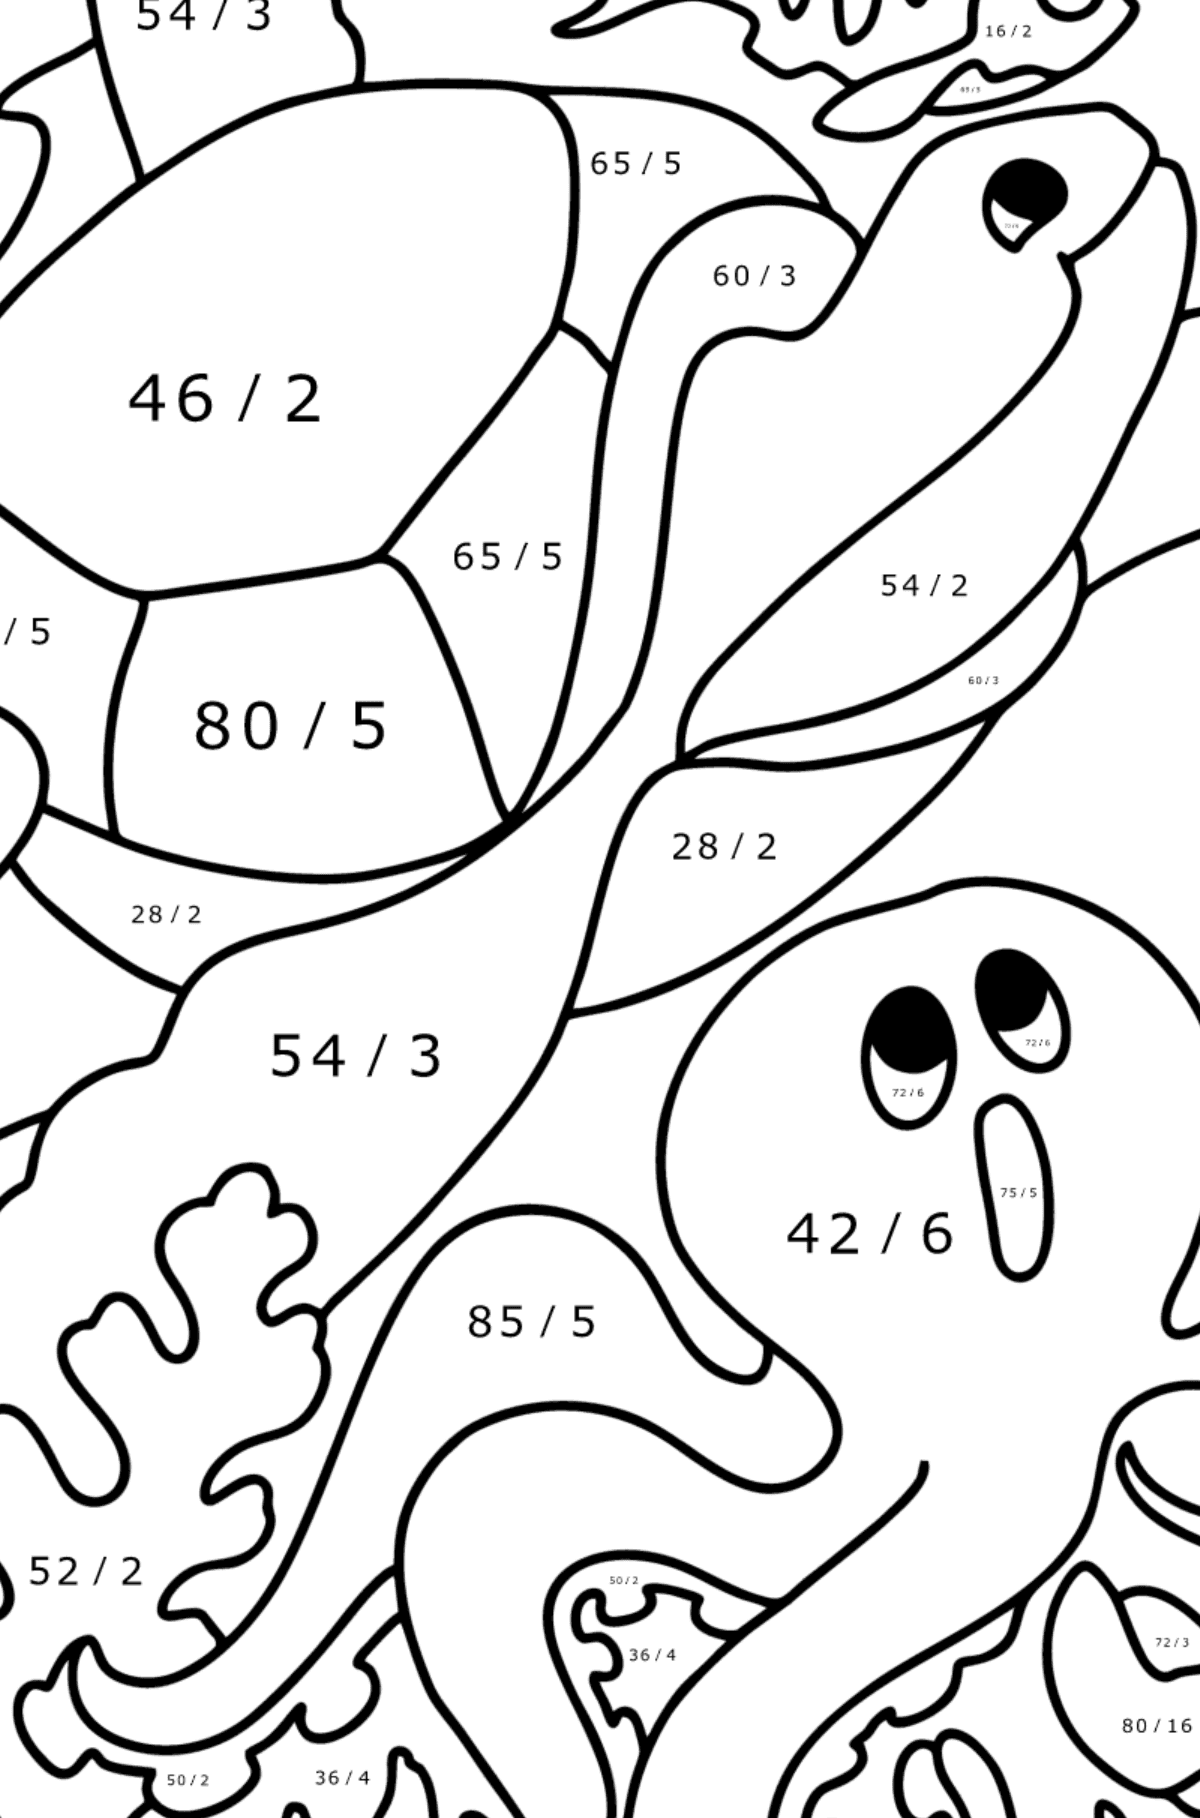 Fish, Turtle, Crab and Octopus coloring page - Math Coloring - Division for Kids